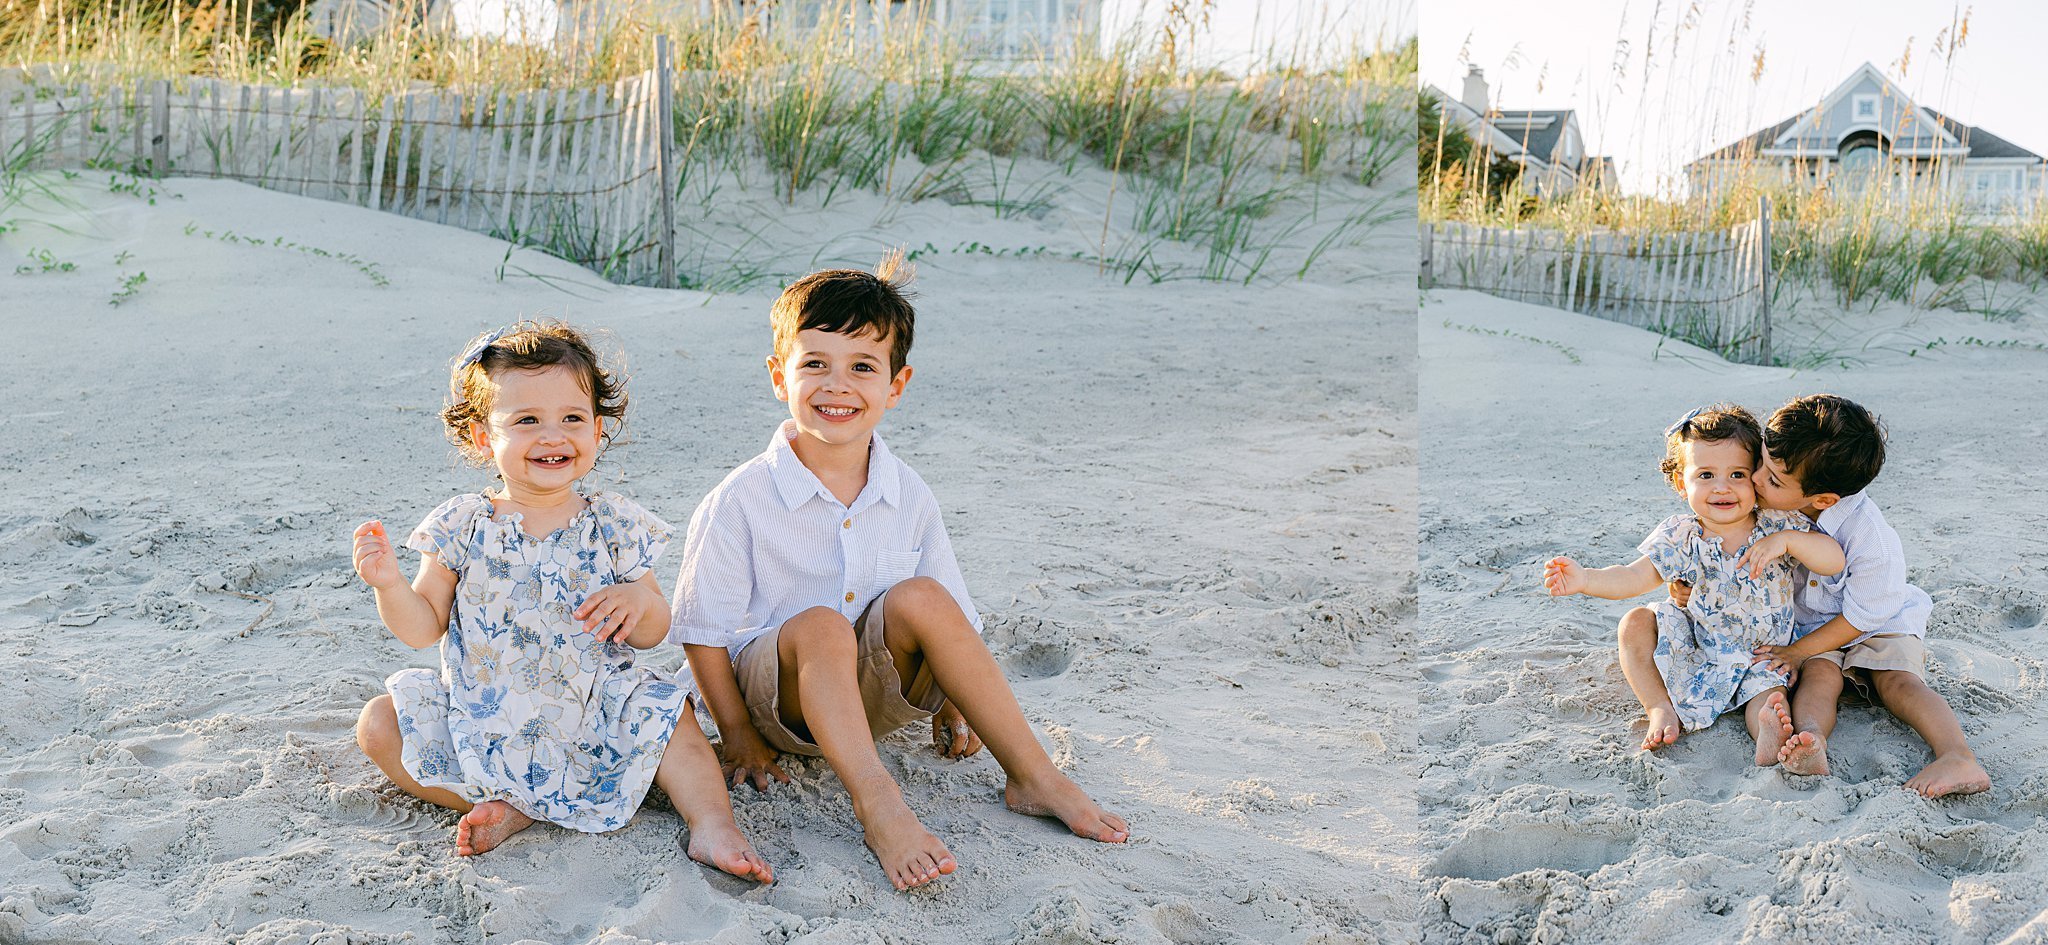 Katherine_Ives_Photography_Chod_Hilton_Head_Extended_Family_Session_89.JPG